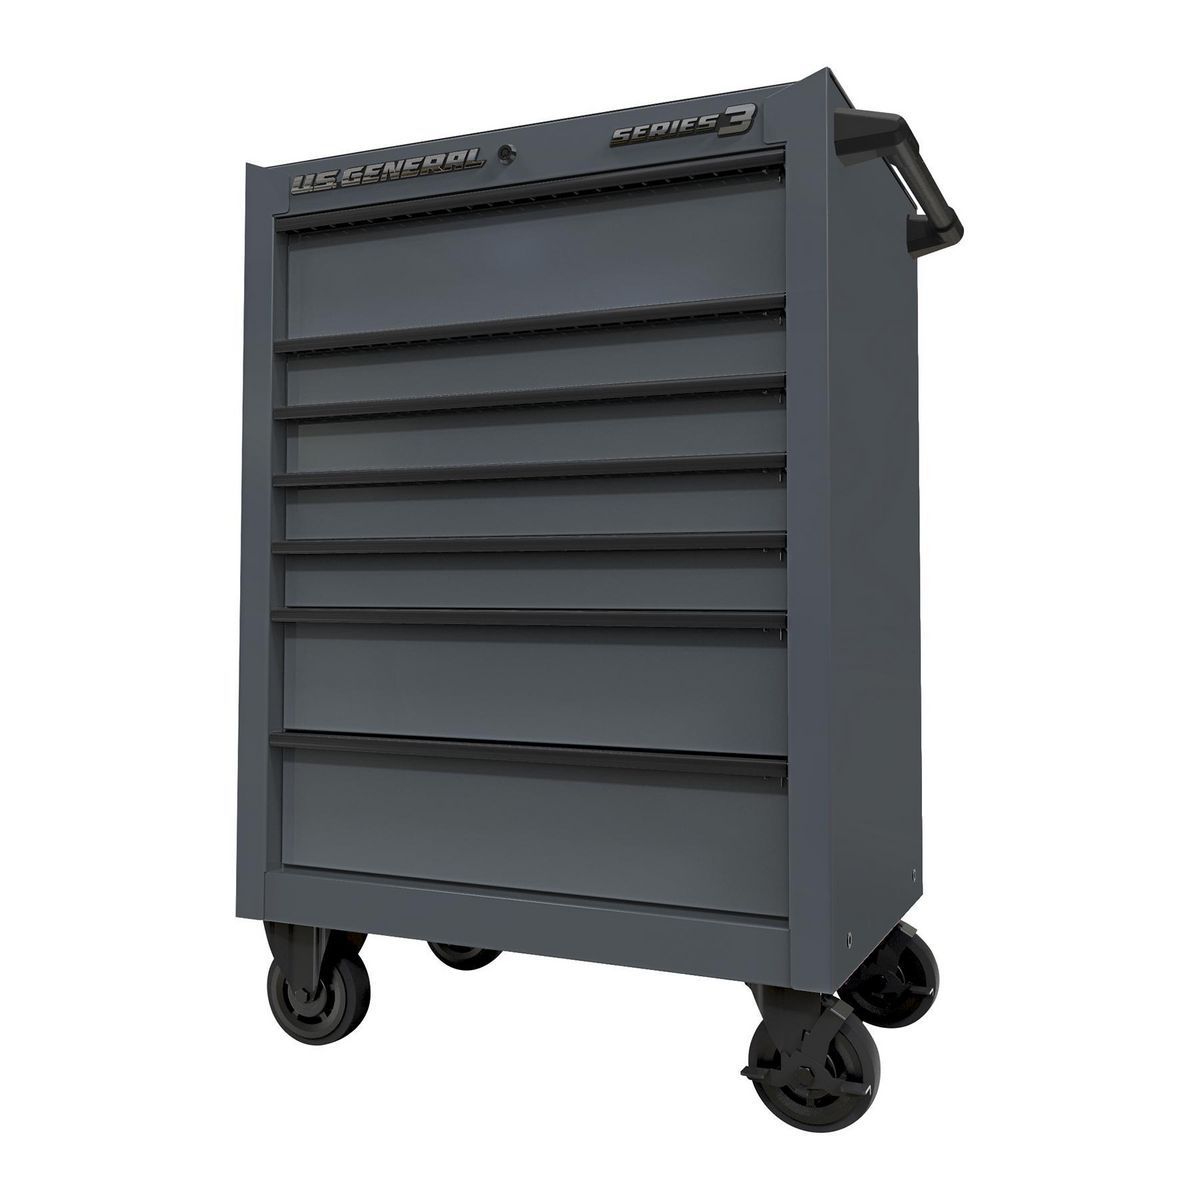 27 in. x 22 in. Roll Cab, Series 3, Slate Gray